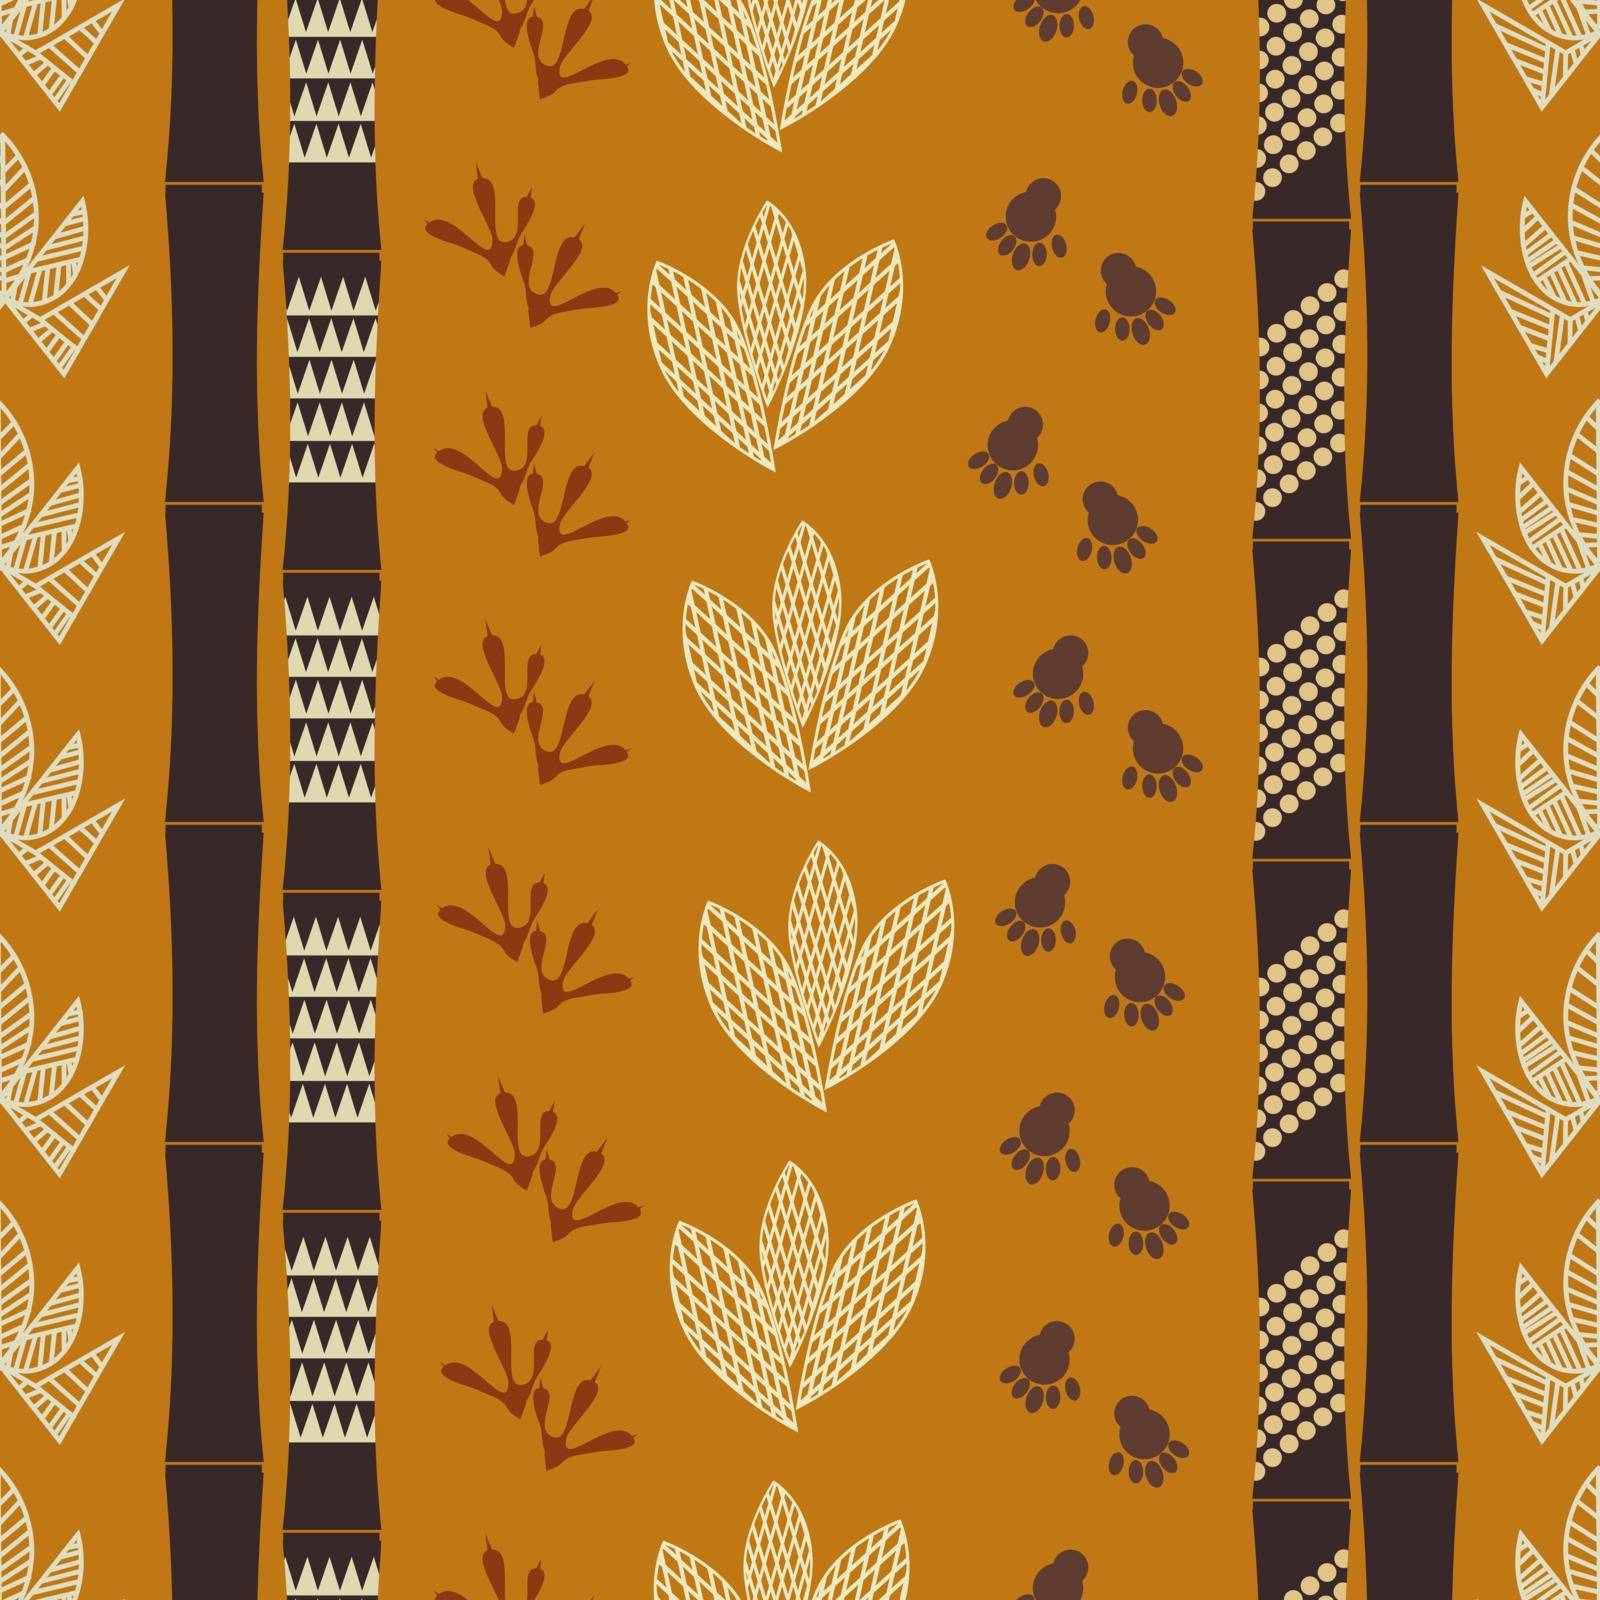 Seamless pattern with Tribal drawing